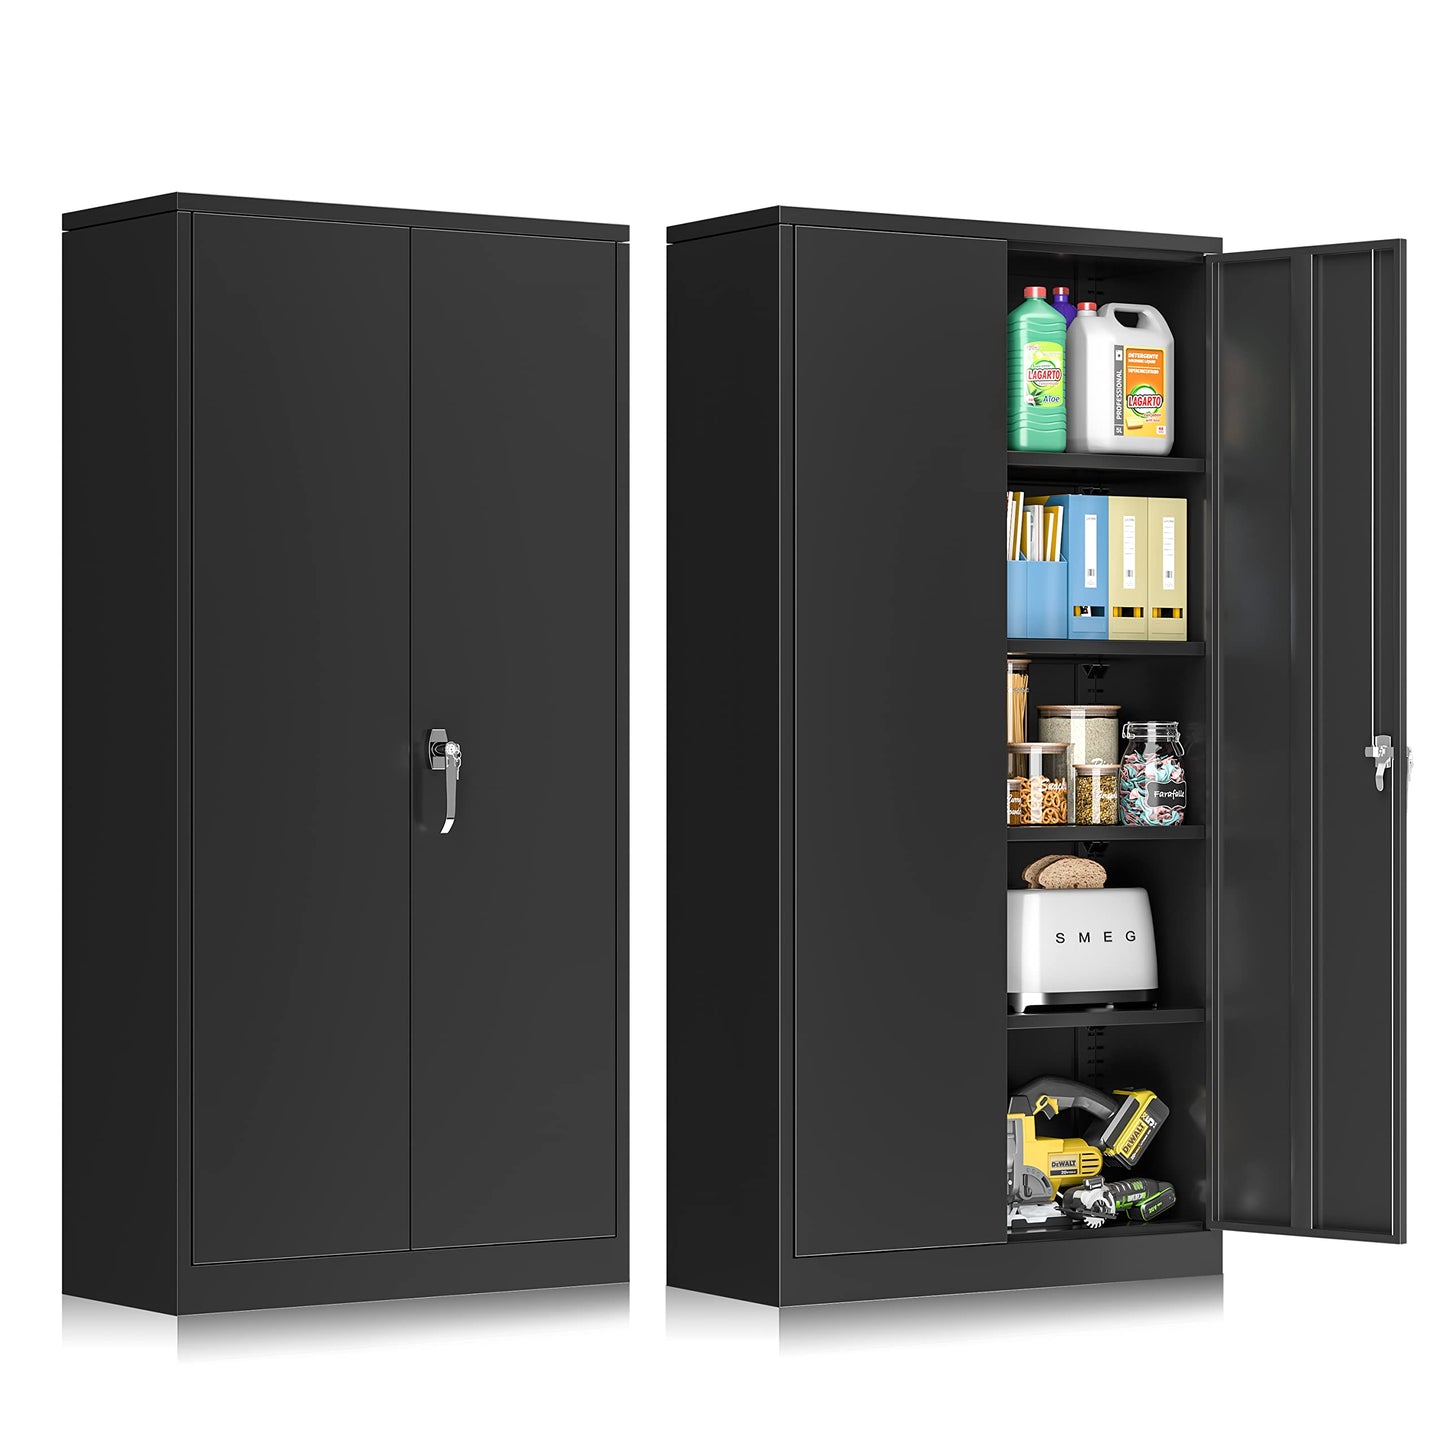 INTERGREAT Black Metal Storage Cabinet with Lock, 72" Tall Lockable Garage Storage Cabinet with Doors and Shelves, Cabinets for Home Office,